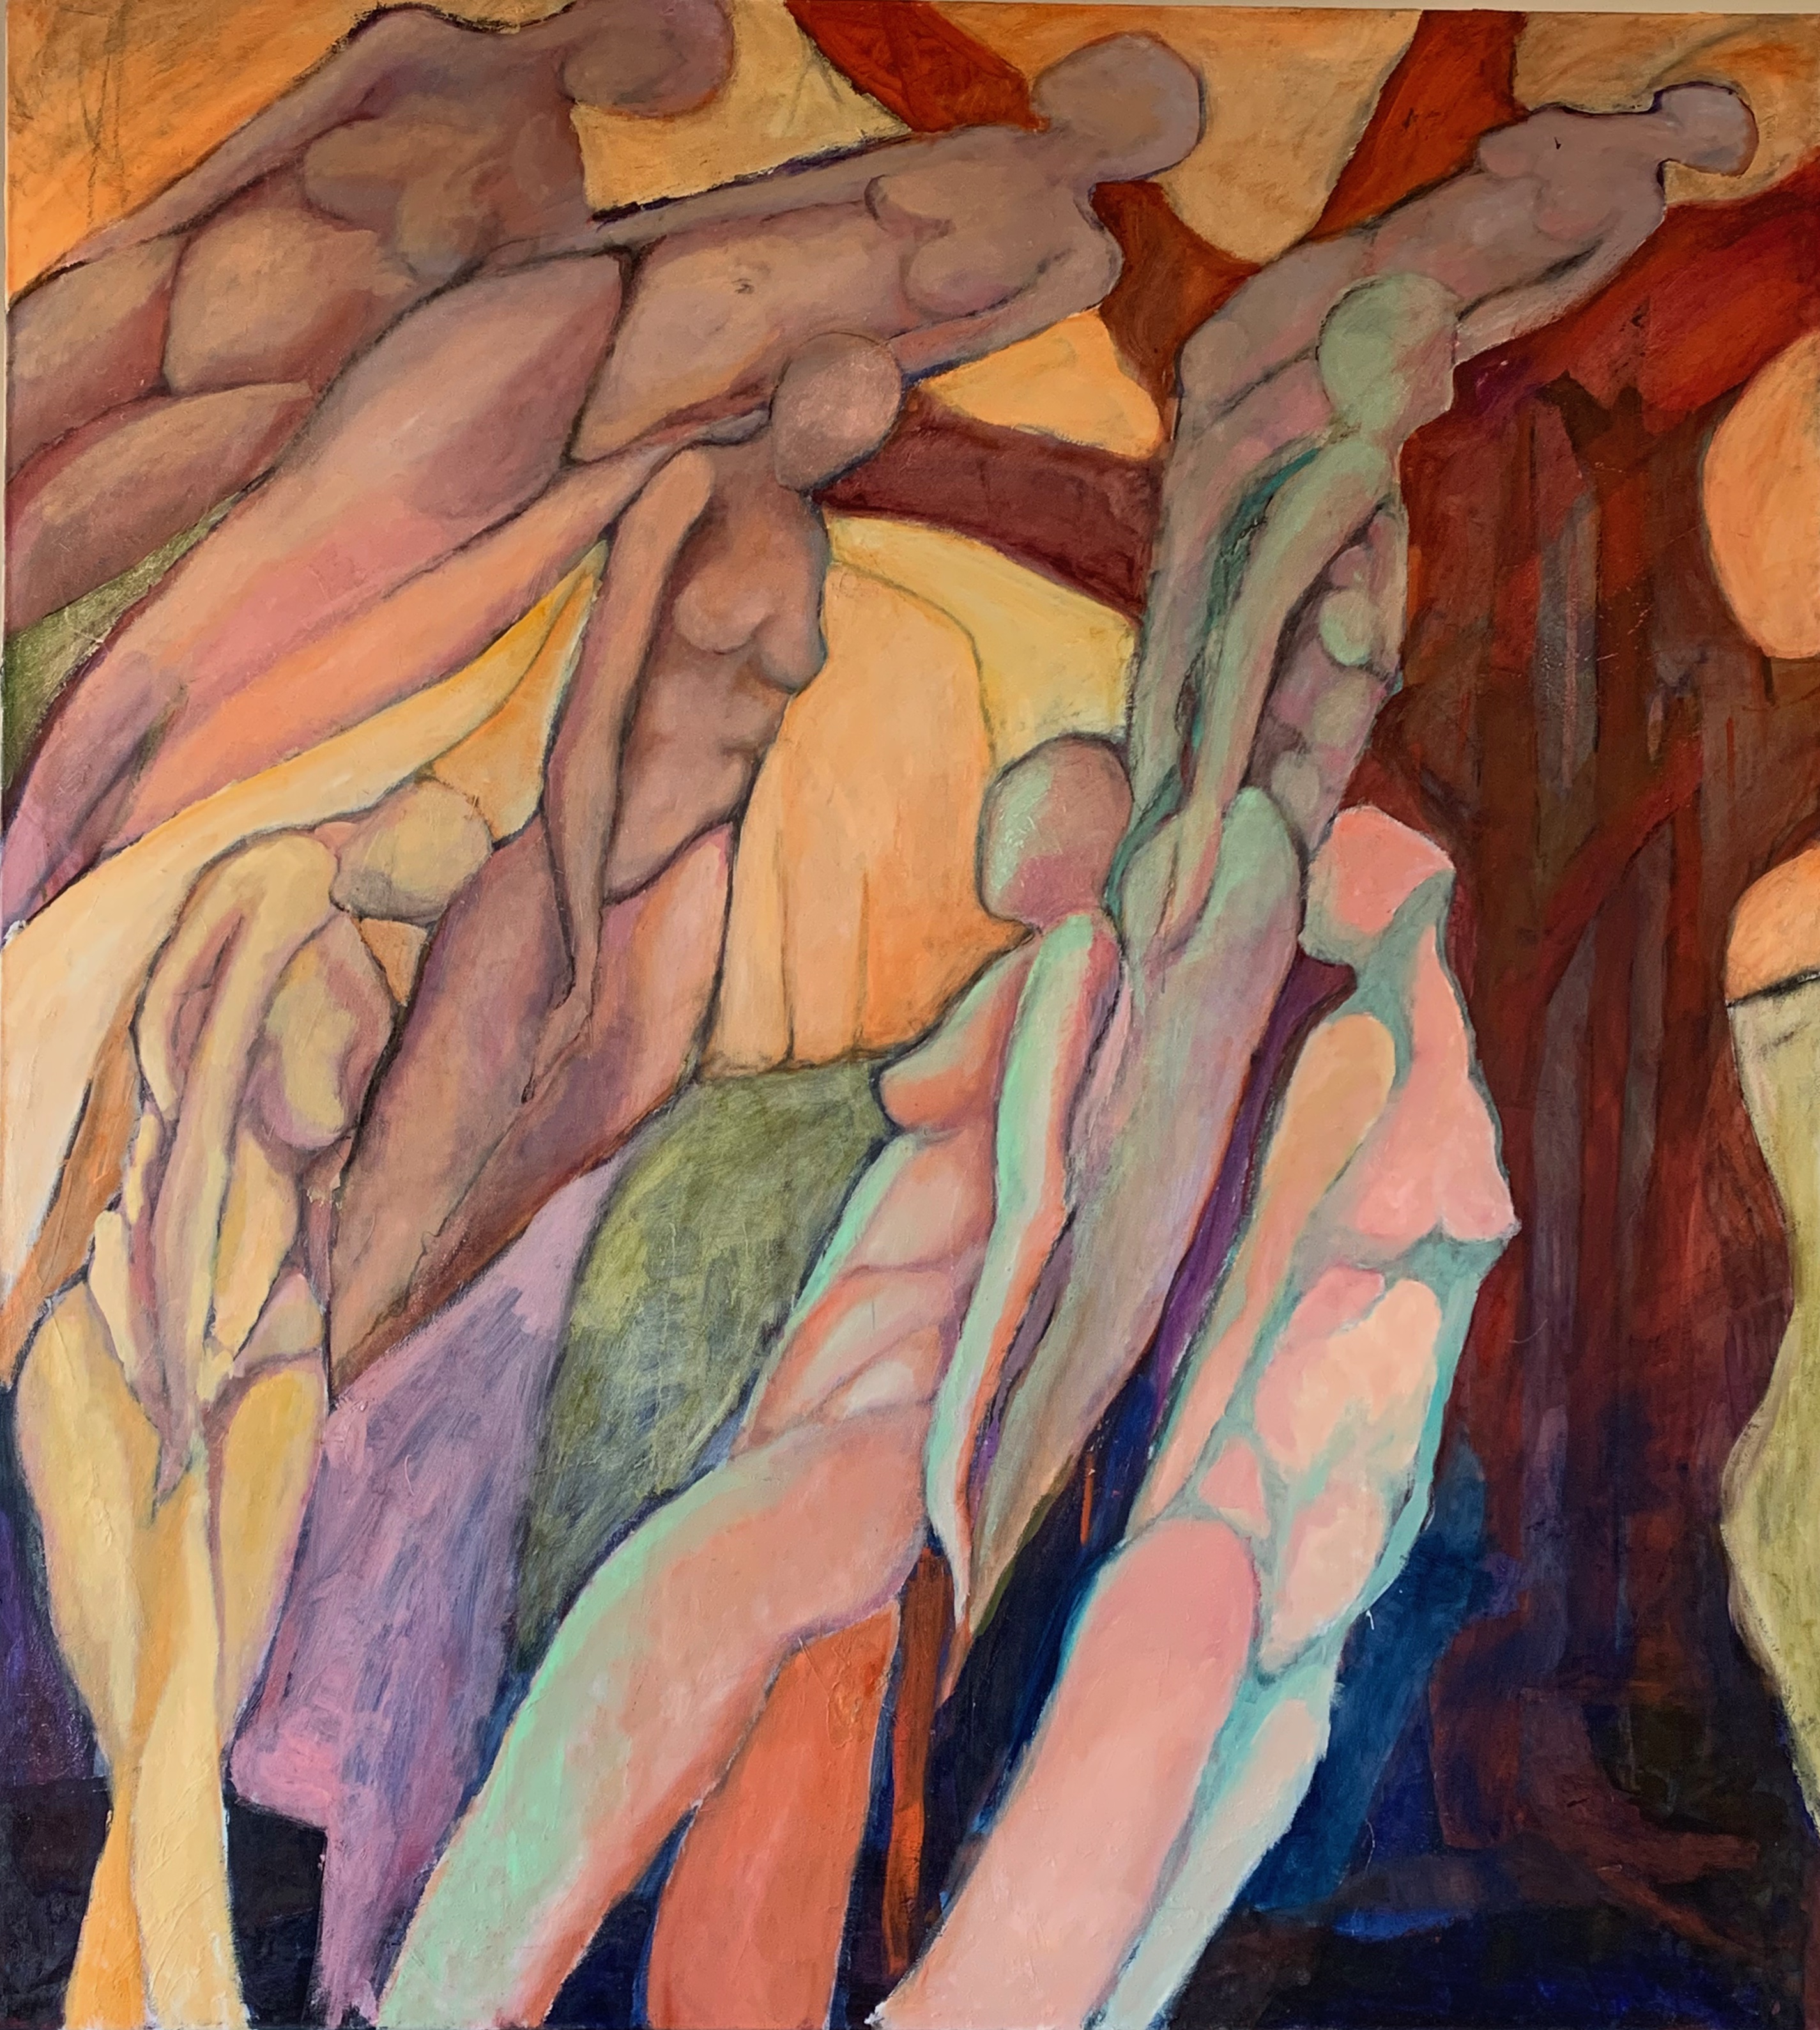 Accession - 80" x 72" oil on canvas